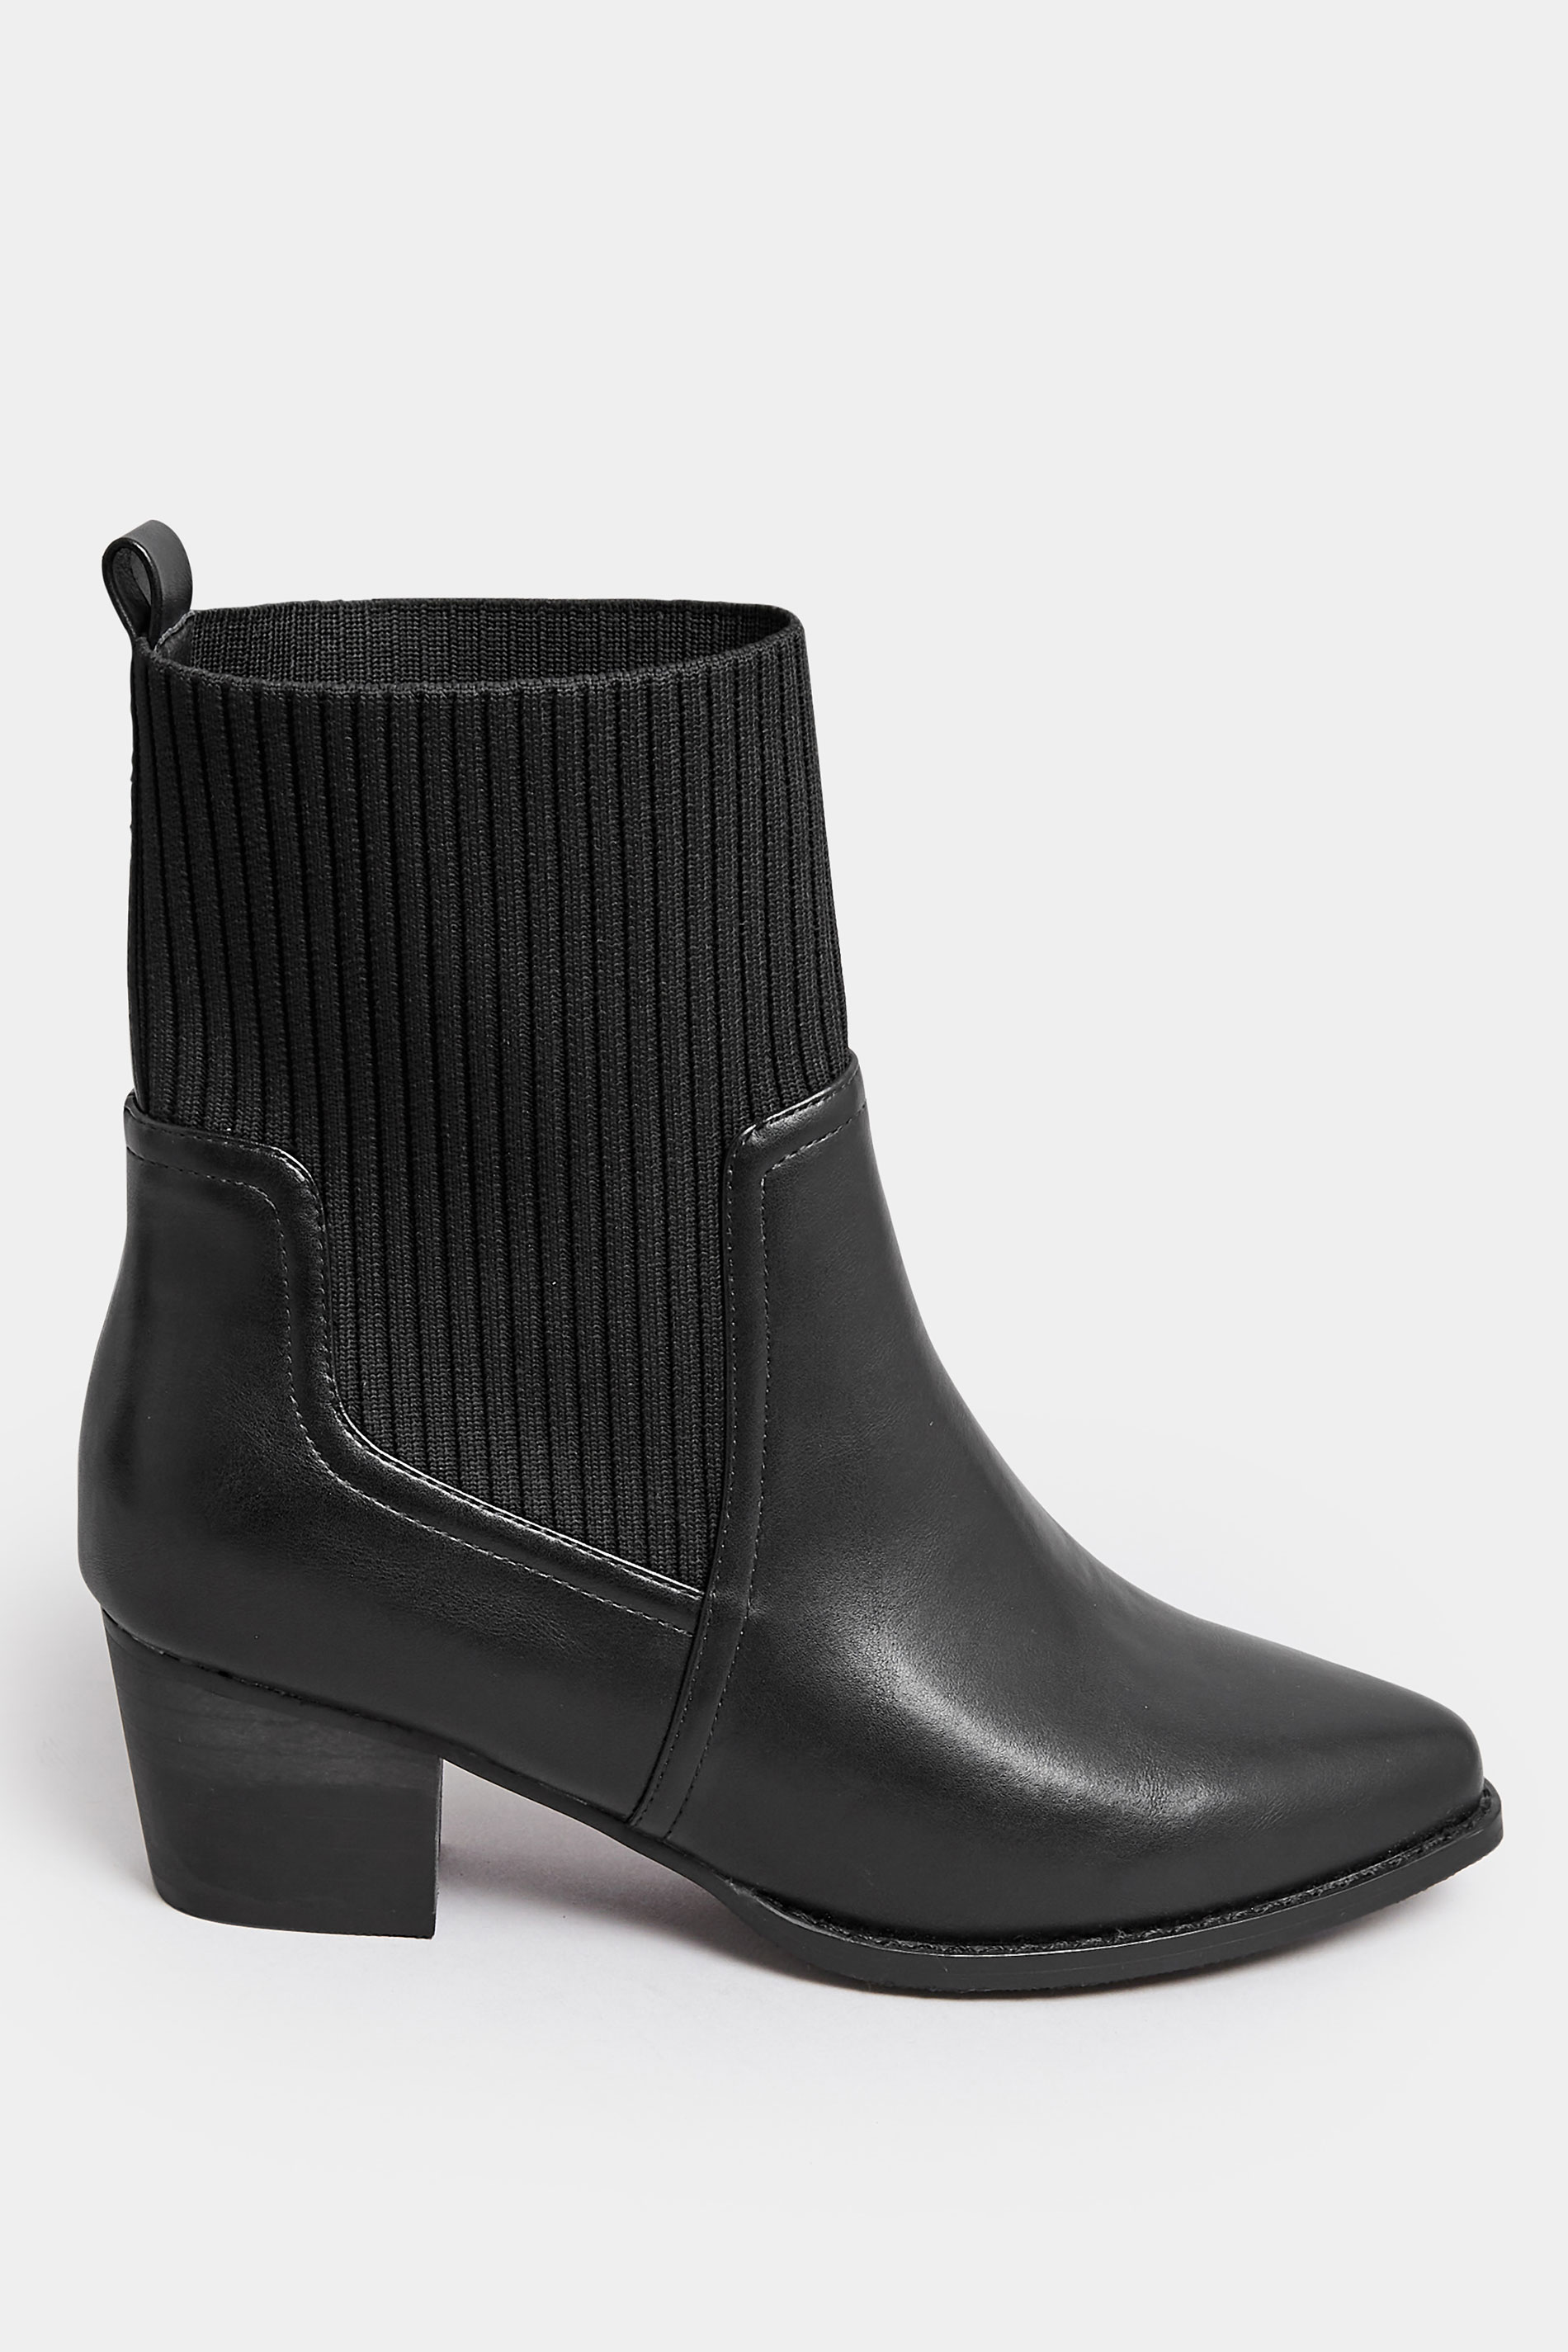 LIMITED COLLECTION Black Sock Top Line Western Heeled Boots In EEE Fit 3